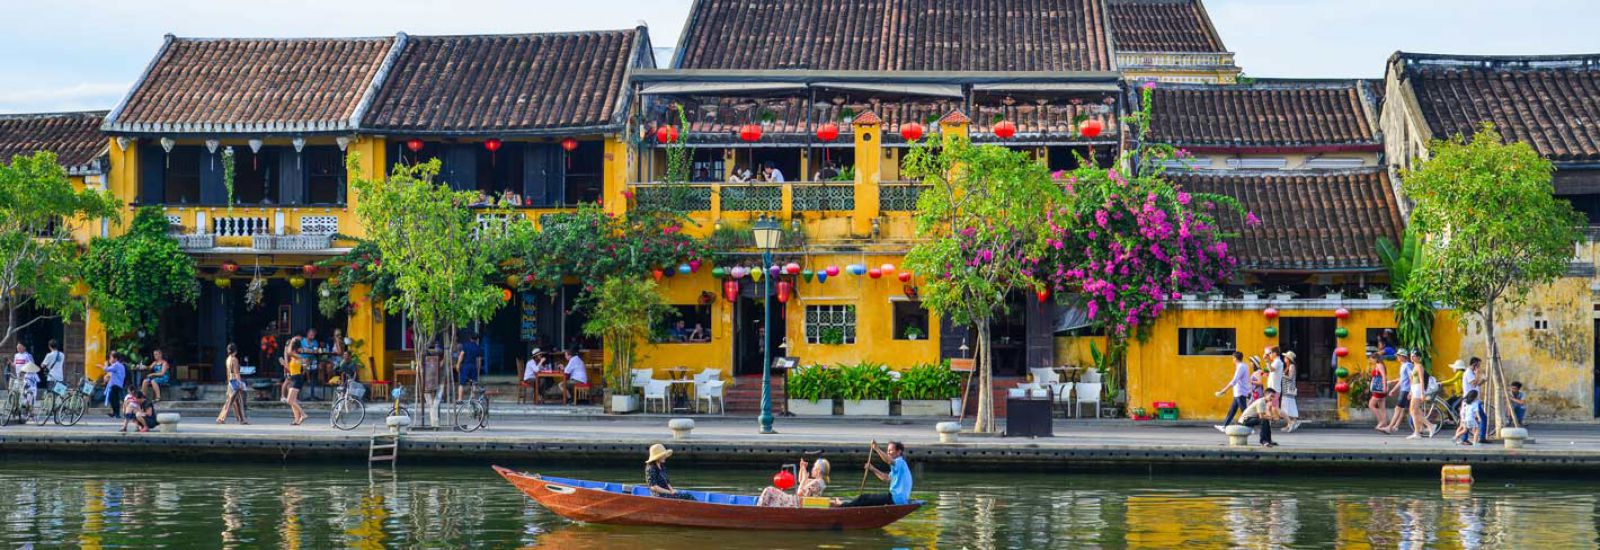 Hoi An Has Been Named Among The Top 10 Best Cities To Visit In Asia